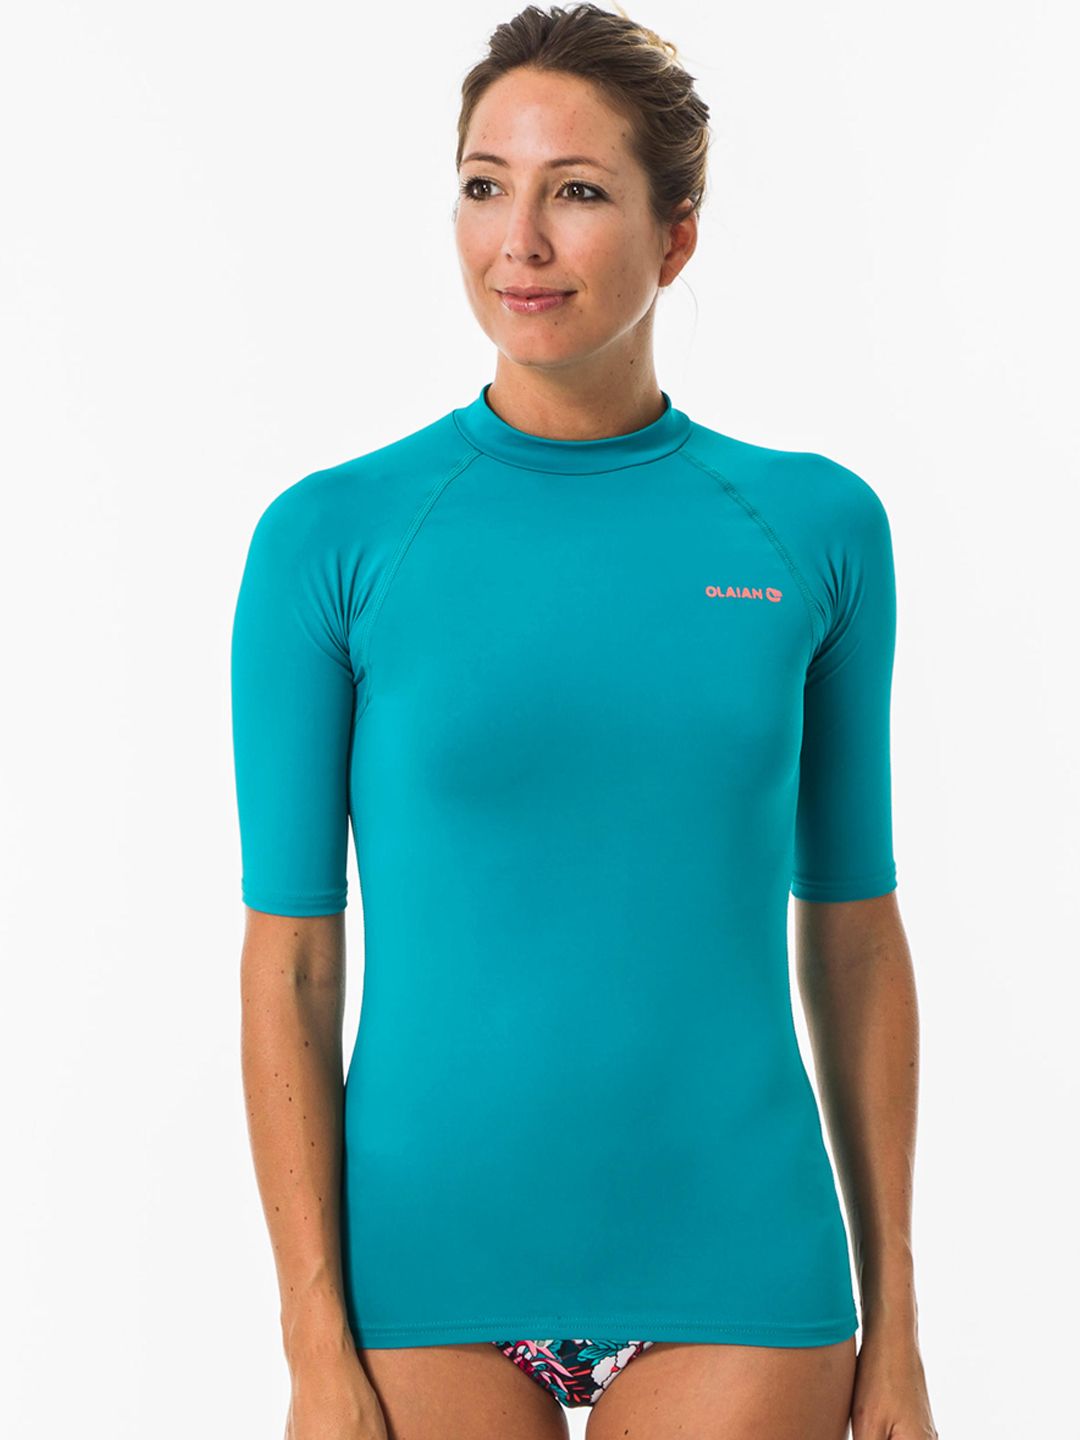 OLAIAN By Decathlon Women Turquoise Blue Solid Surfing Top Price in India